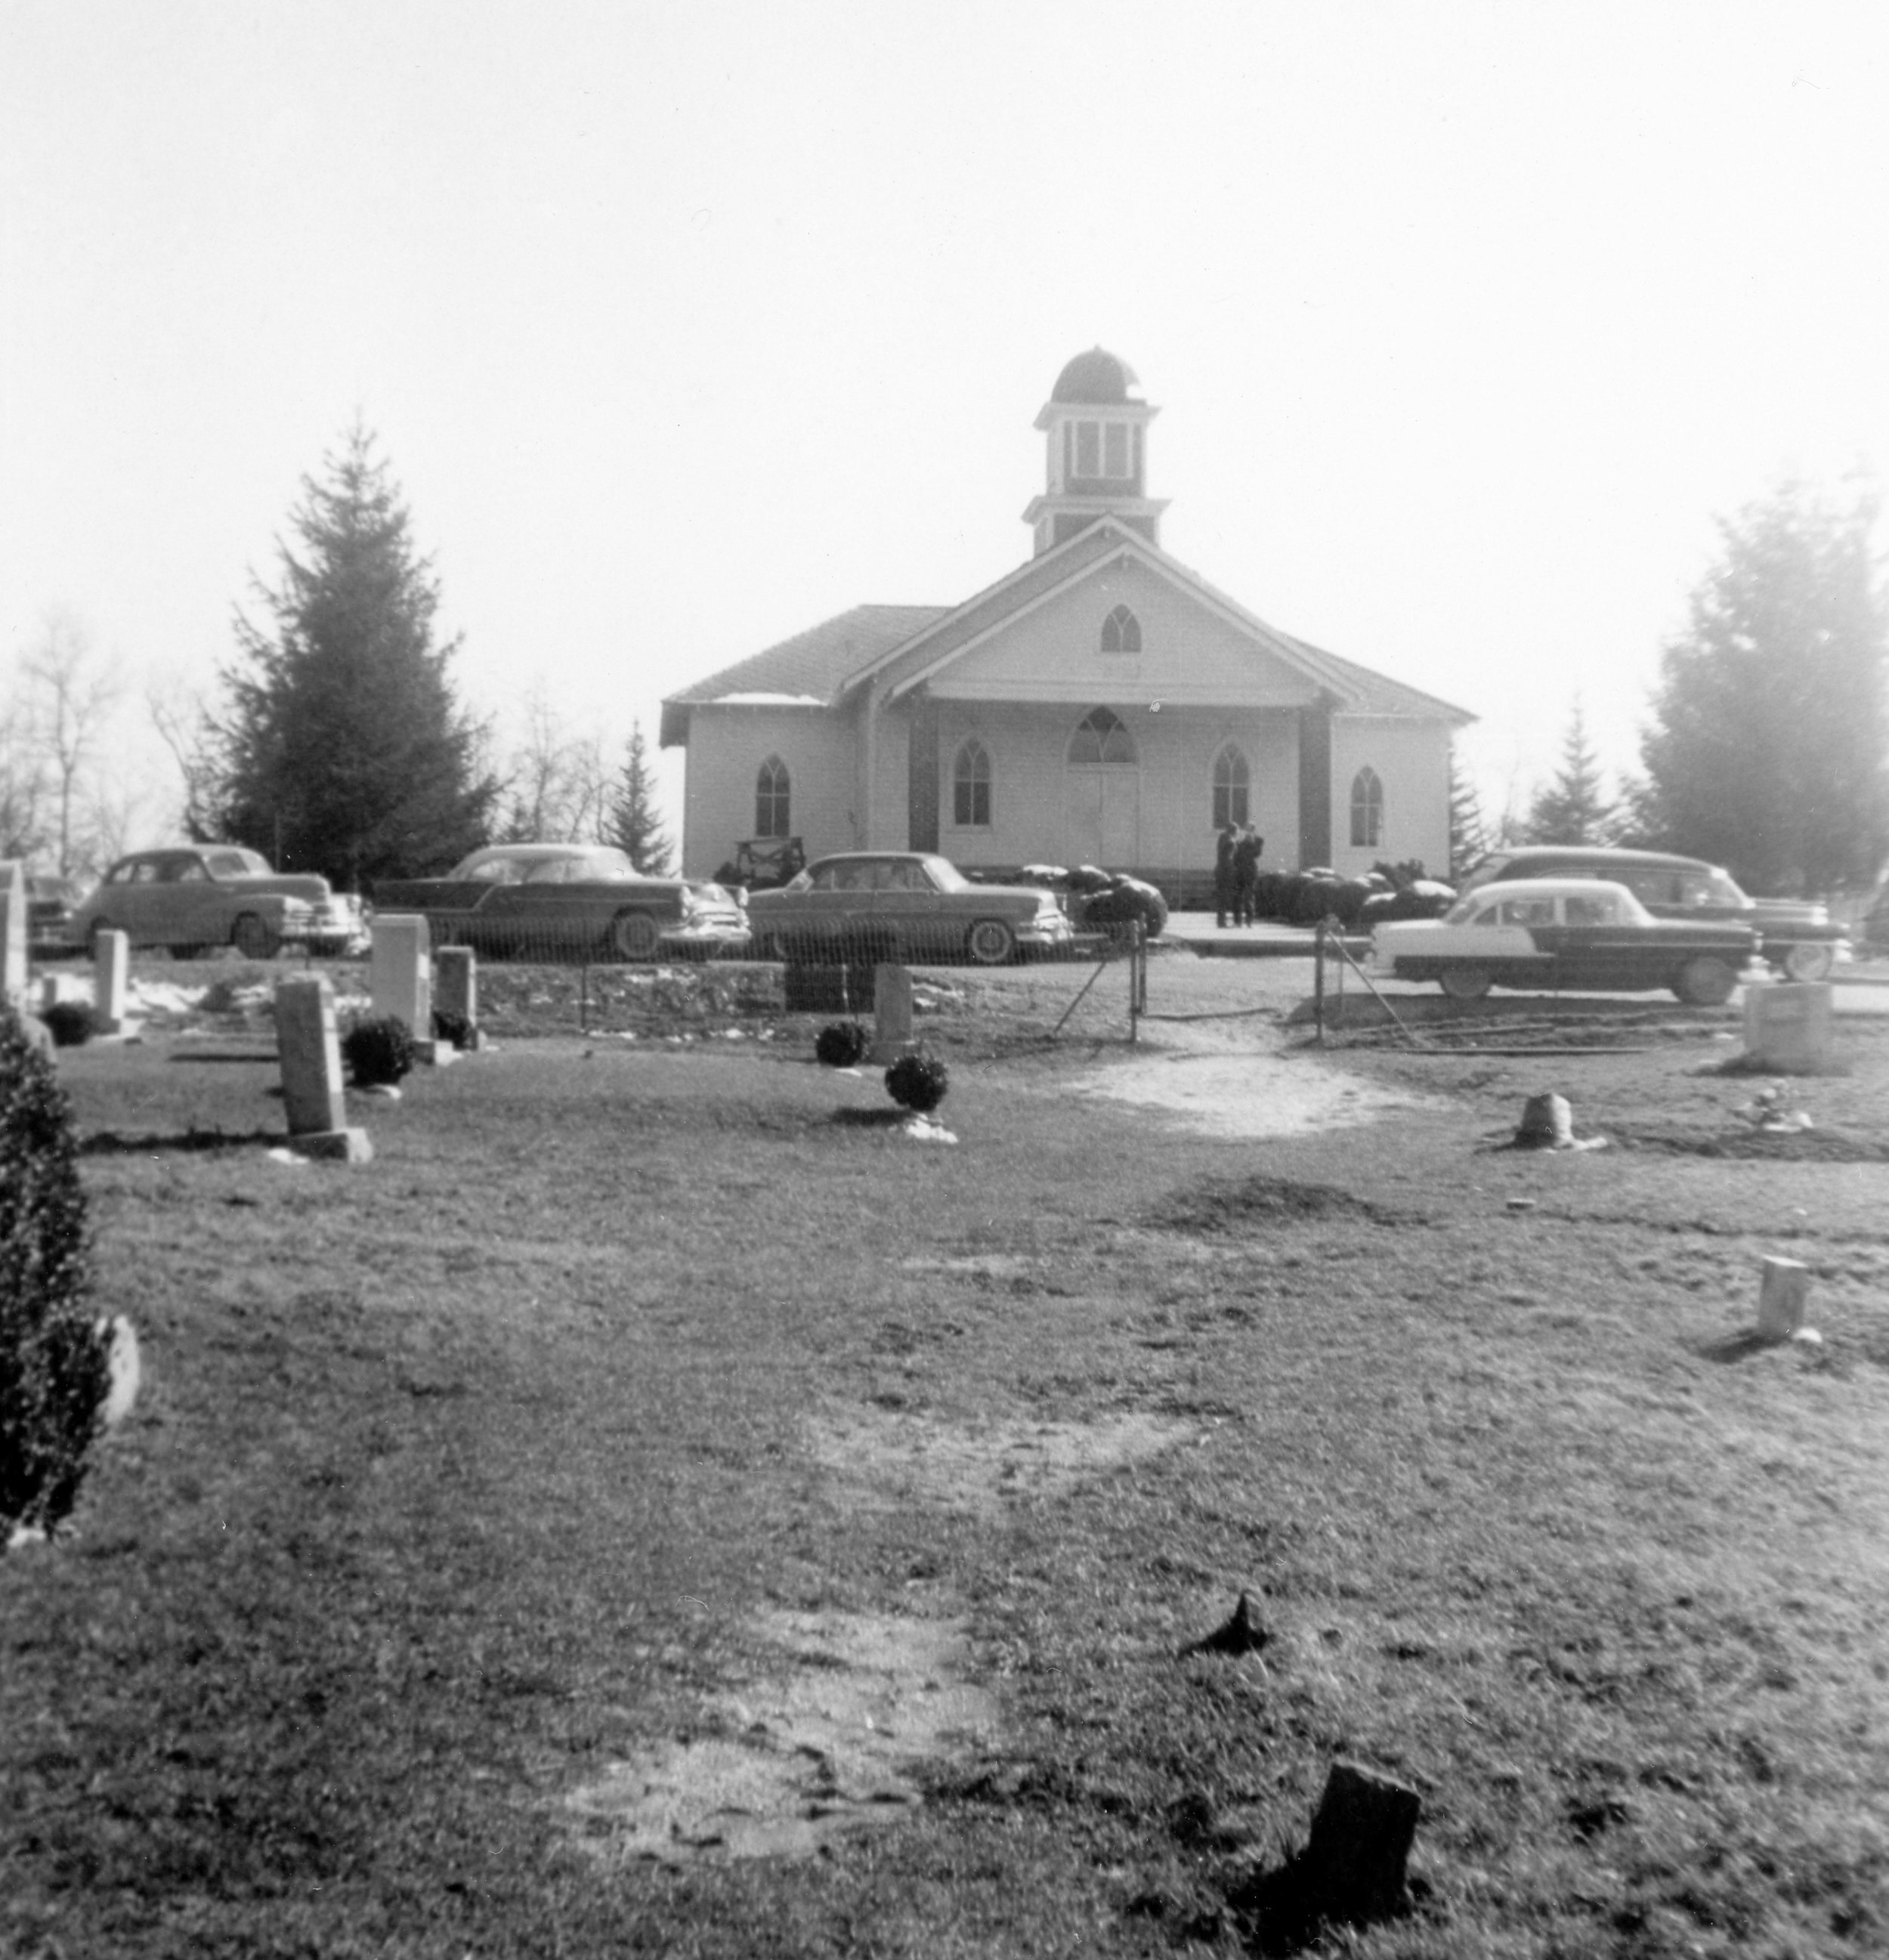 Bear Creek Baptist Church Cemetery the day of Eli's funeral in 1956